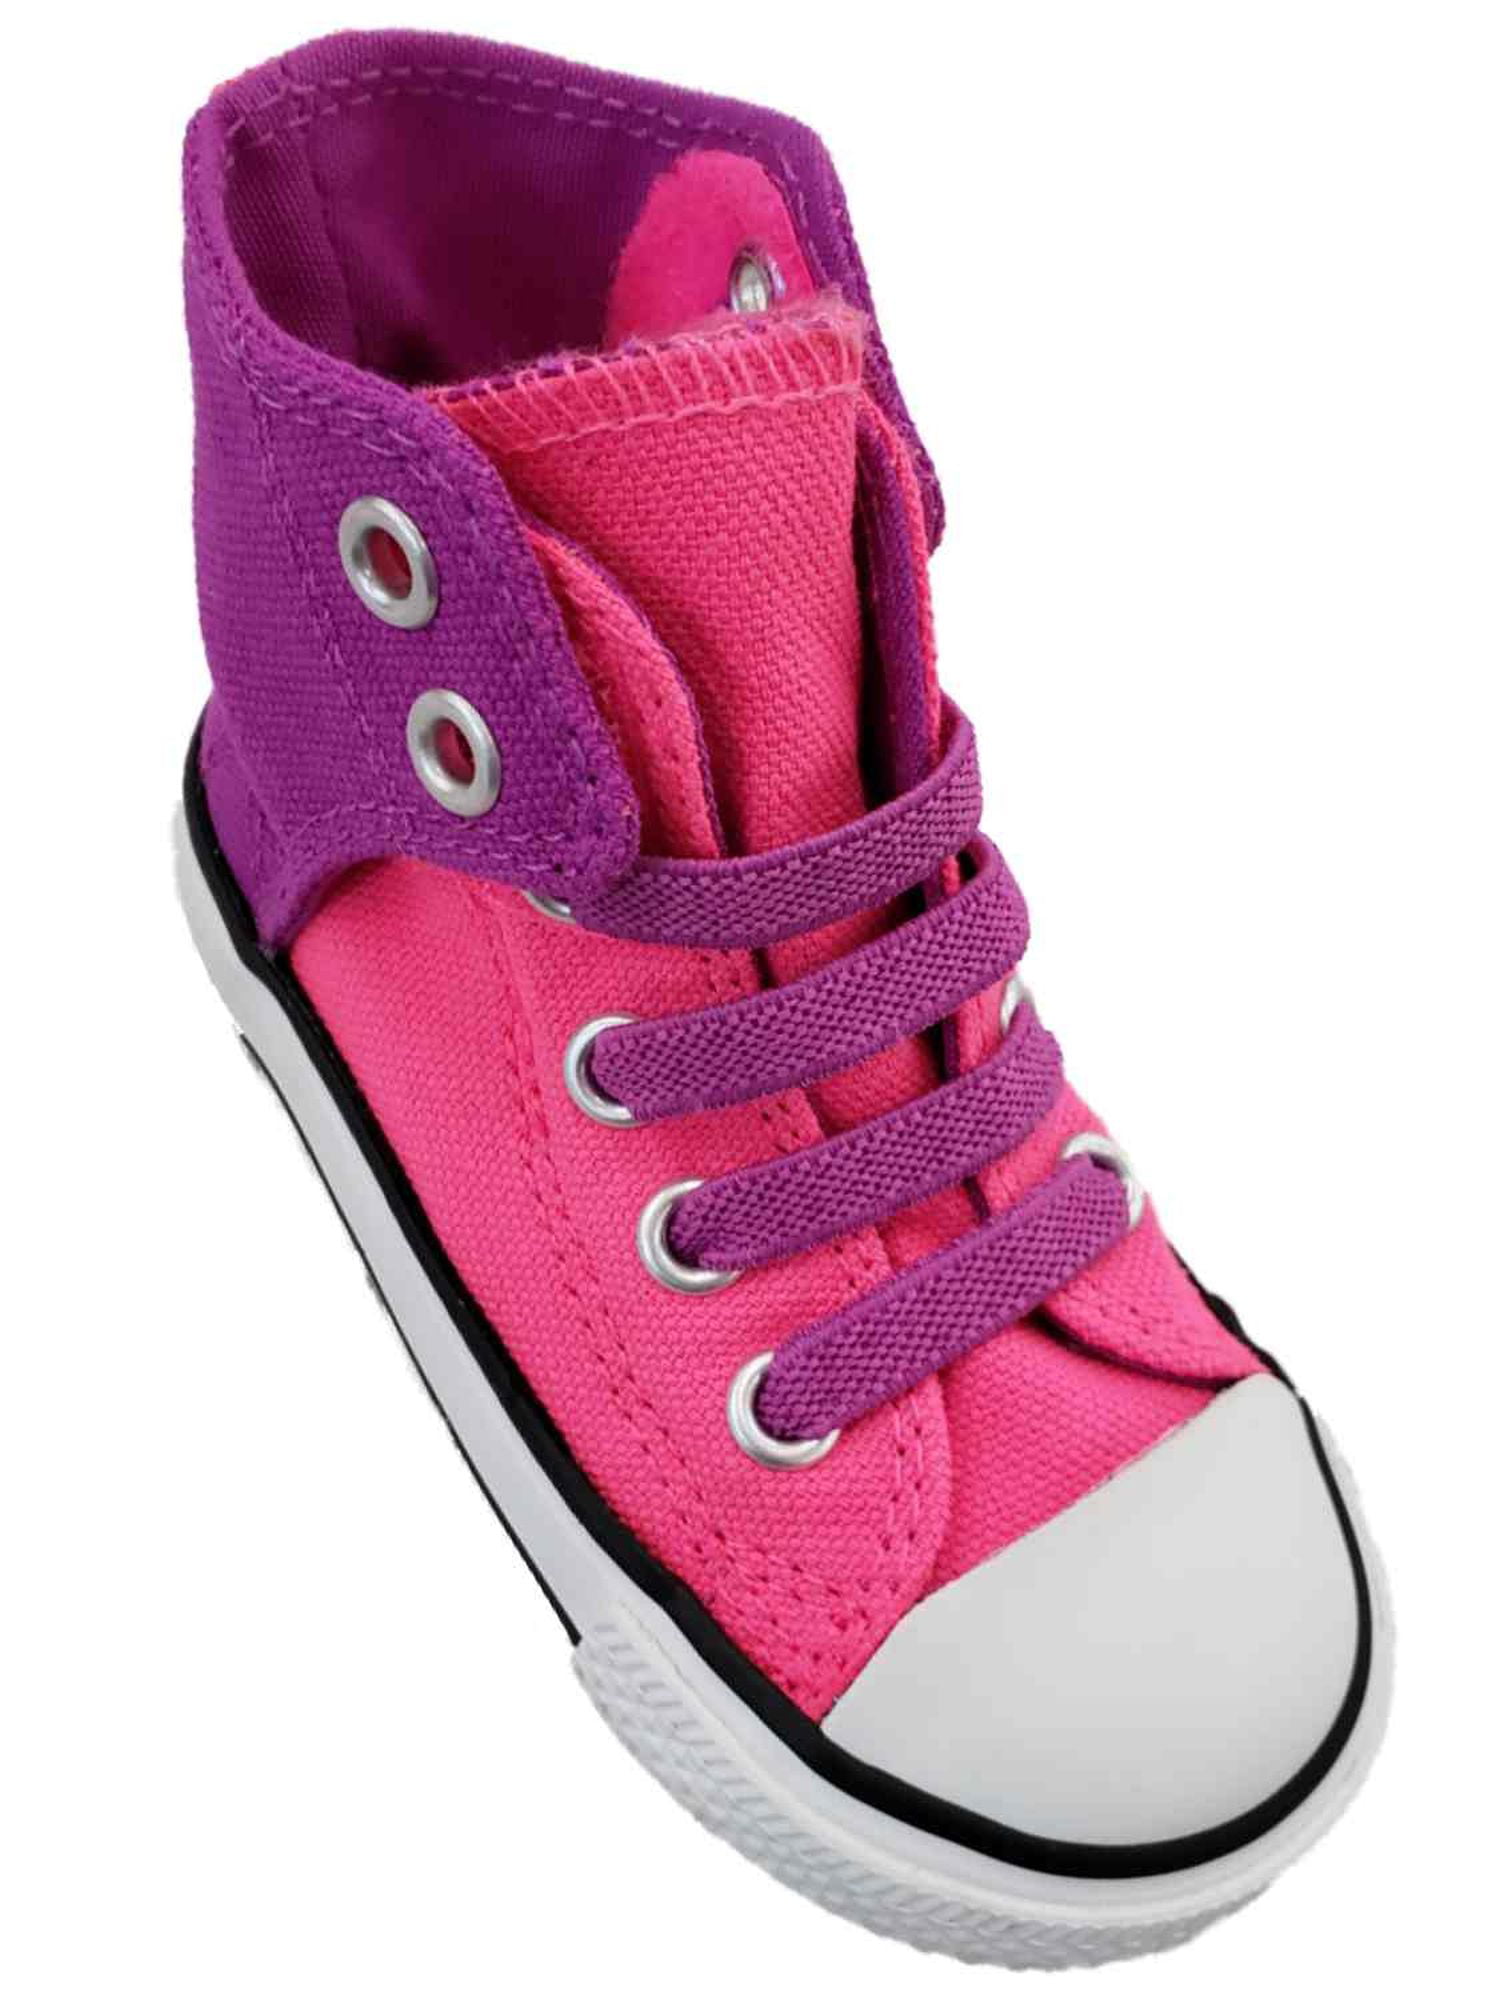 Converse All Star Toddler Bright Pink Purple Laced Sneakers Shoes Tops 5 - Walmart.com